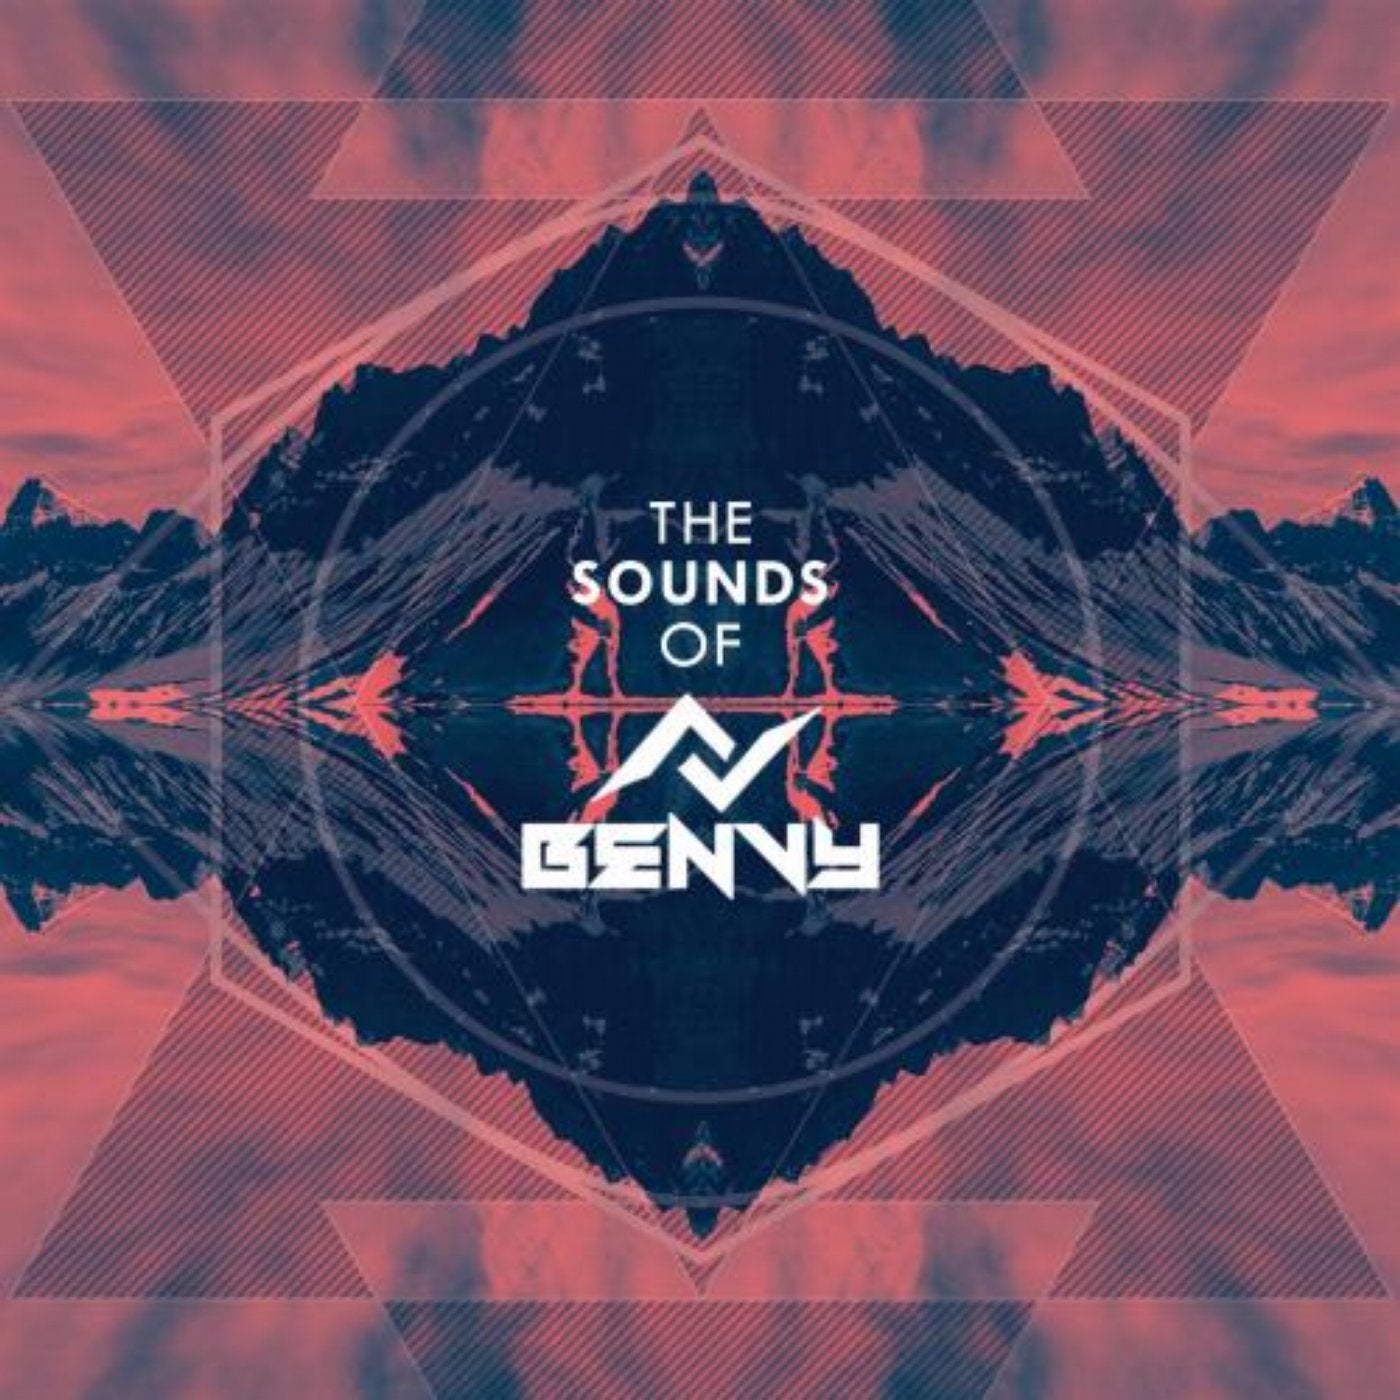 The Sounds of Benvy